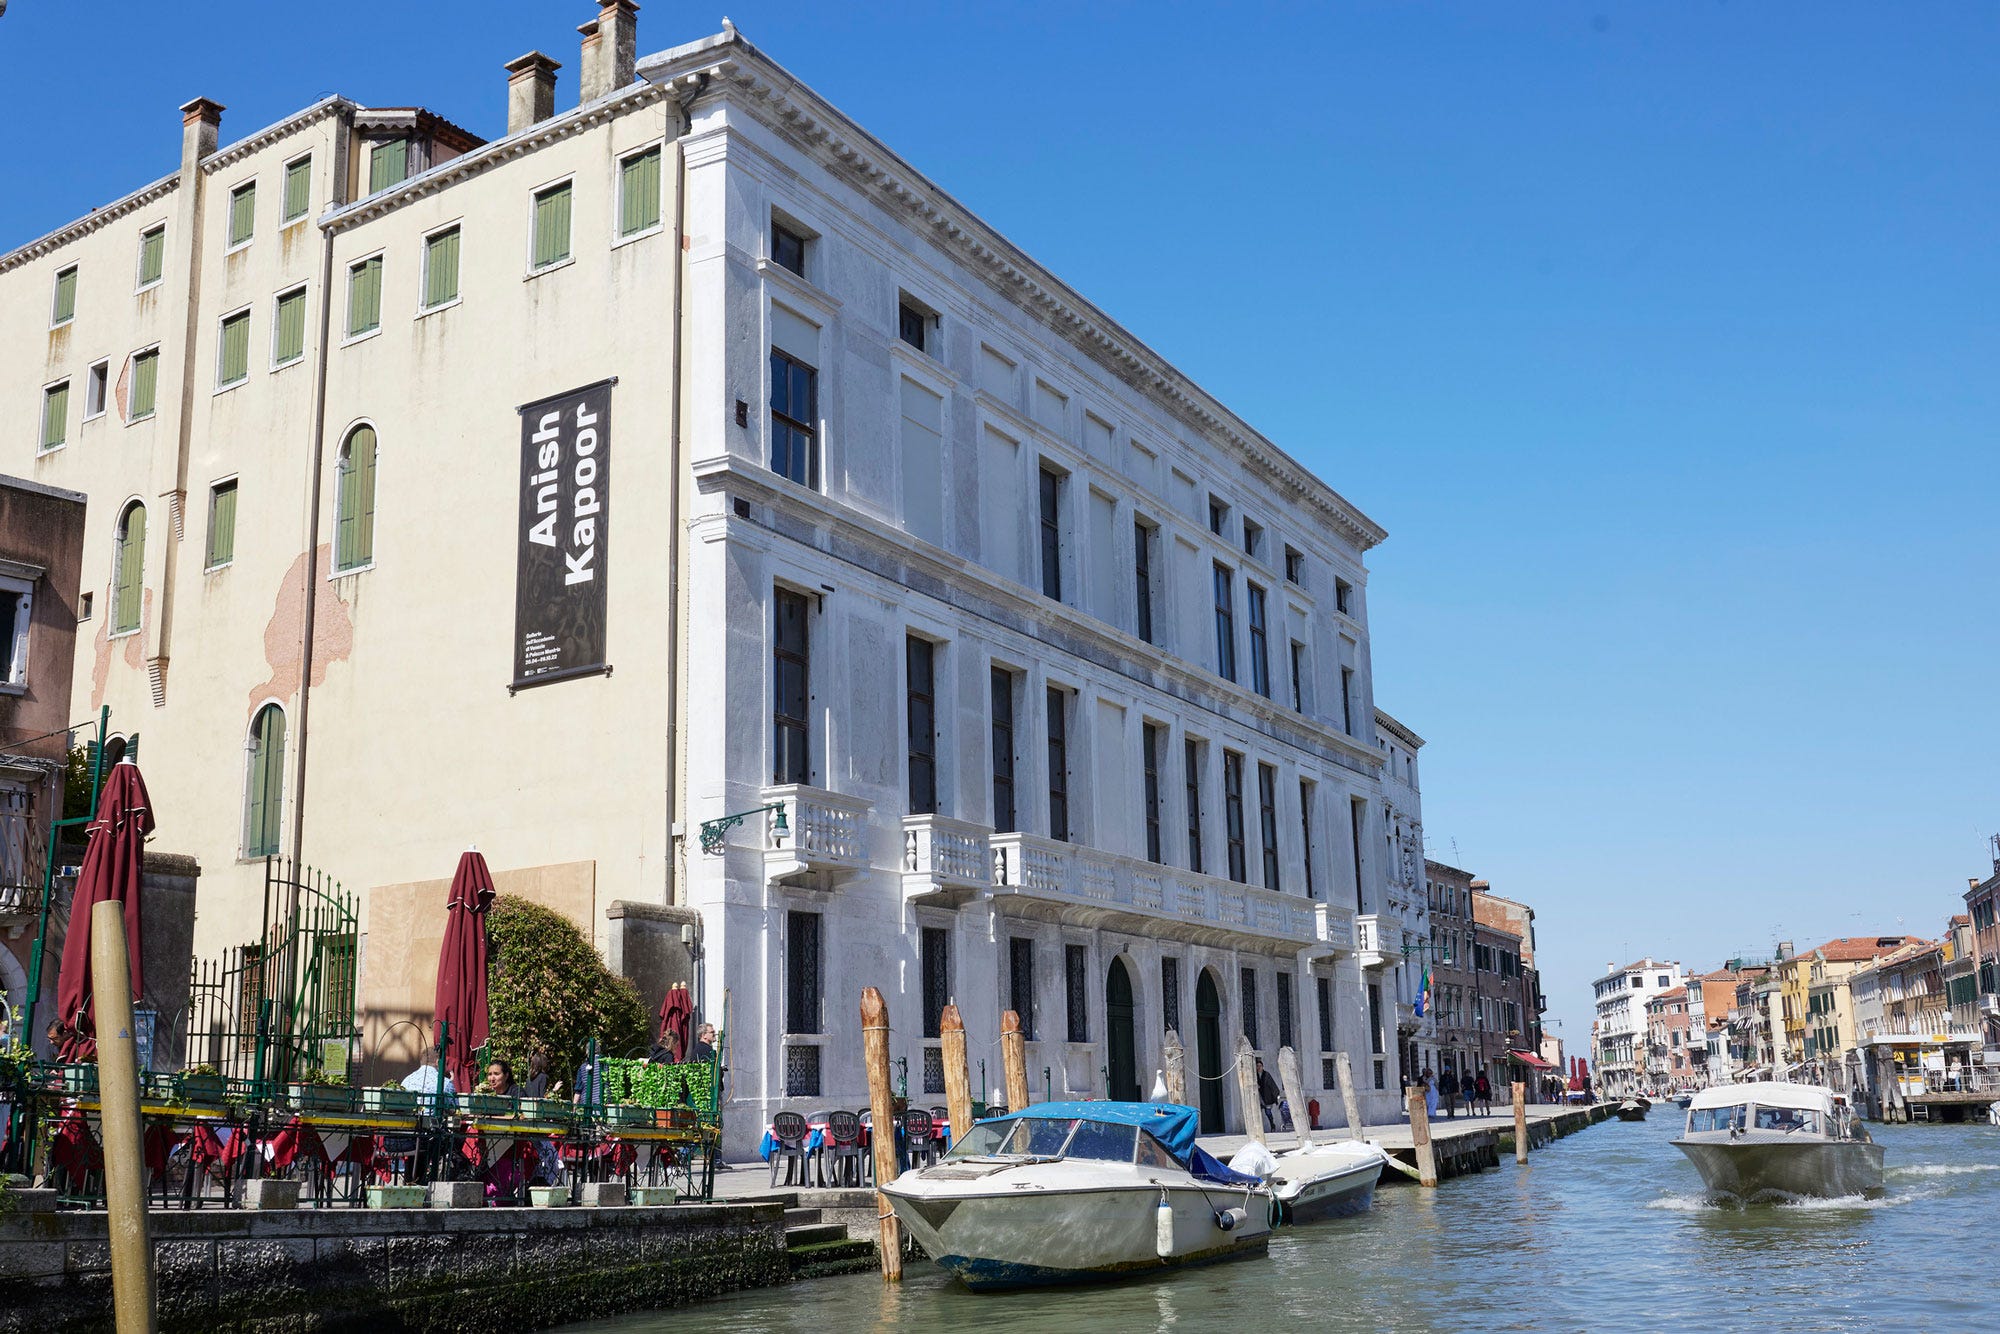 Turns out, the Italian city's art world blooms all year long.